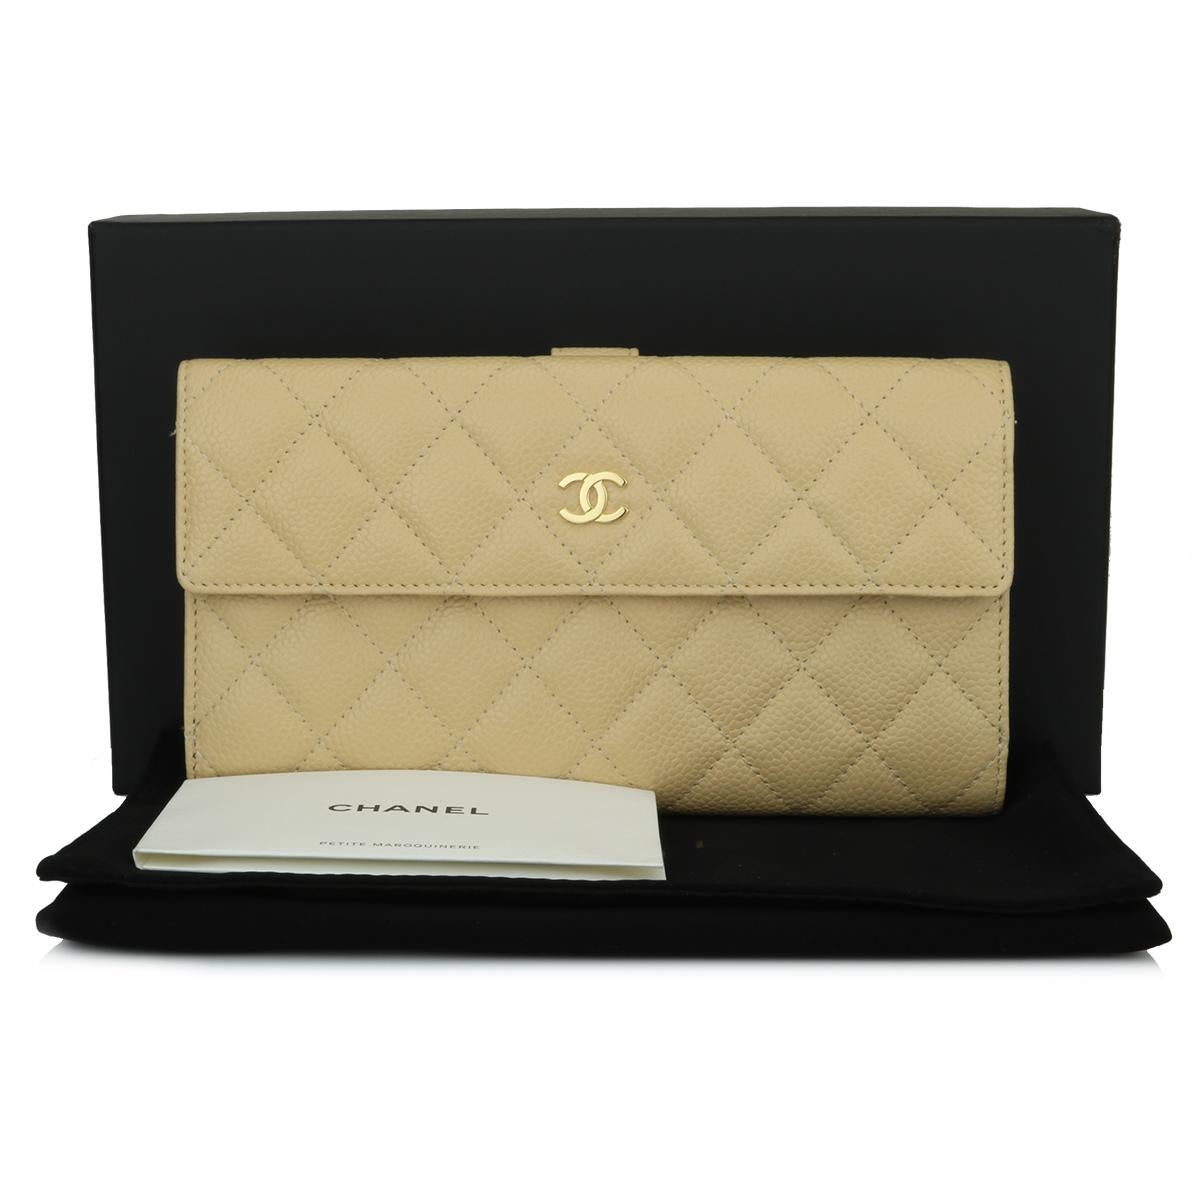 Authentic CHANEL Classic Flap Bifold Wallet Beige Caviar with Gold Hardware 2012.

This stunning flap wallet is in pristine condition, the wallet still holds its original shape, and the hardware is still very shiny.

Exterior Condition: Pristine